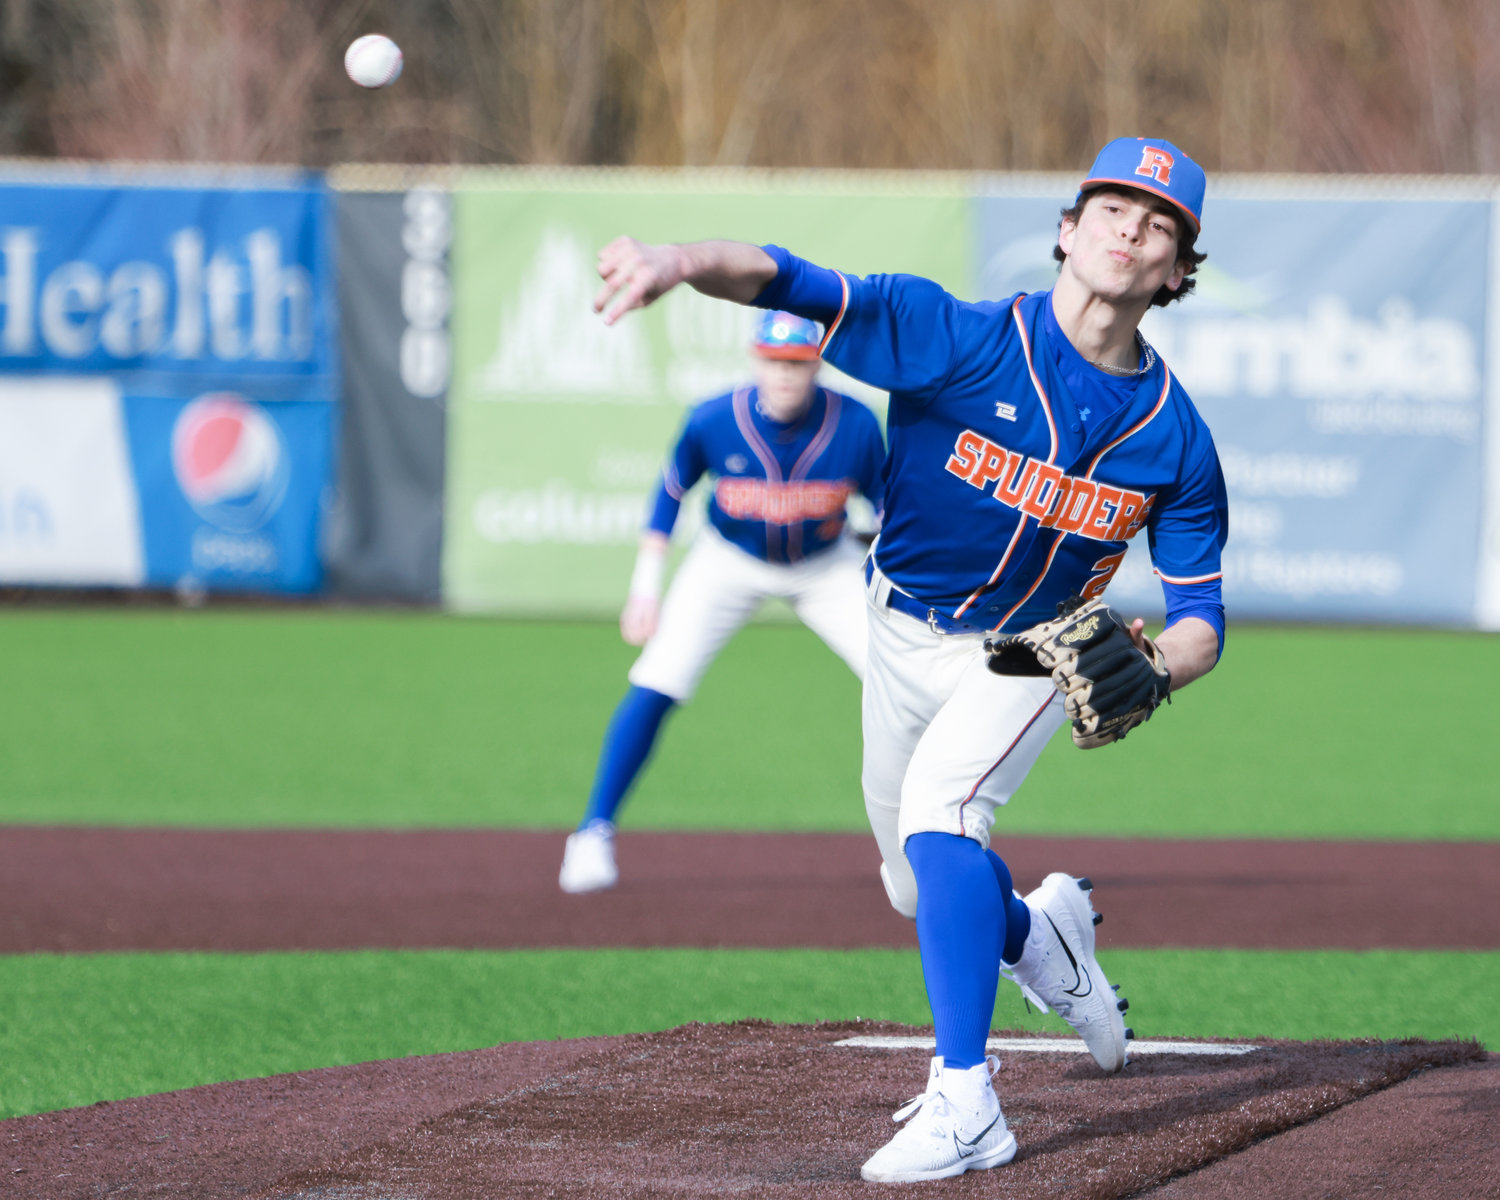 Rocco Wright started on the mound for the Ridgefield Spudders and threw for three complete innings against the Prairie Falcons on Tuesday, March 14.